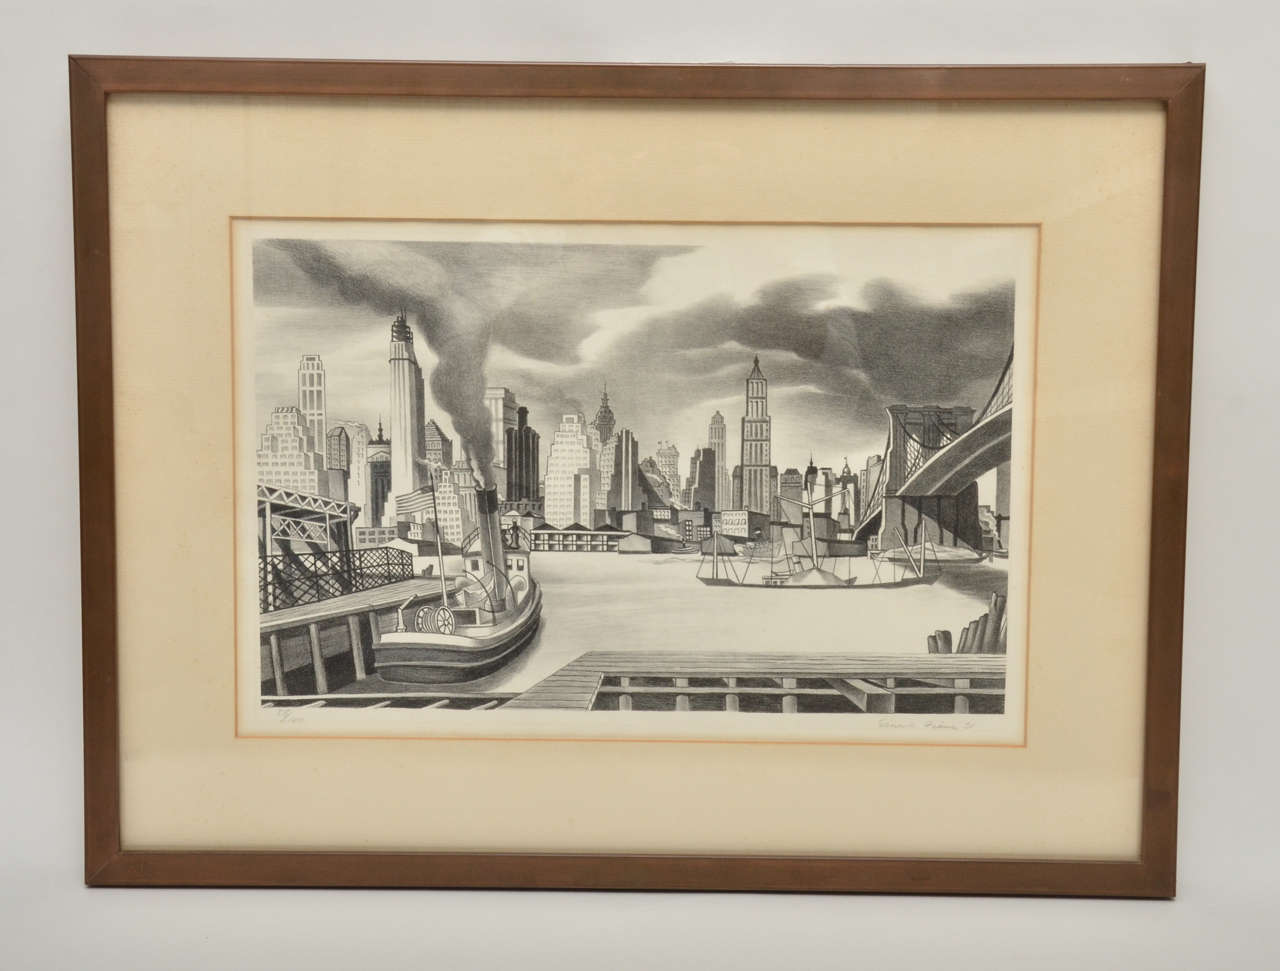 Iconic 1931 view of lower Manhattan from waterfront near the Brooklyn Bridge. Lithograph depicts East river traffic and the rising canyon of 1920s lower Manhattan skyscrapers. Lithograph, full margins, signed, dated and numbered 58/100 in pencil.